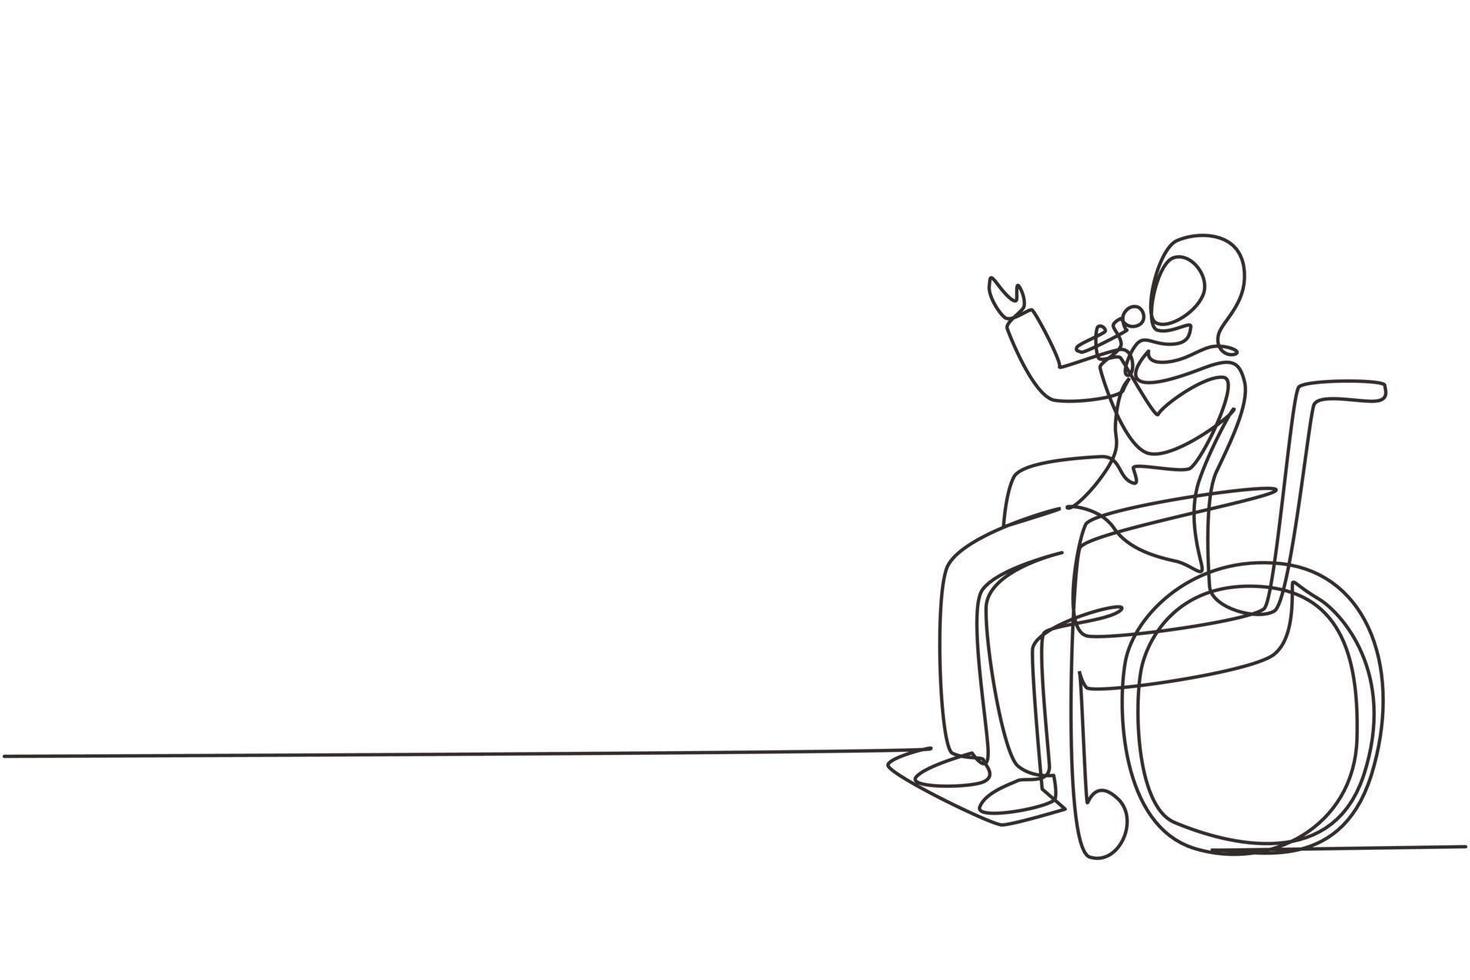 Single continuous line drawing disabled person enjoying life. Arabian woman sitting in wheelchair singing at karaoke. Spend time in recreational place. One line draw graphic design vector illustration